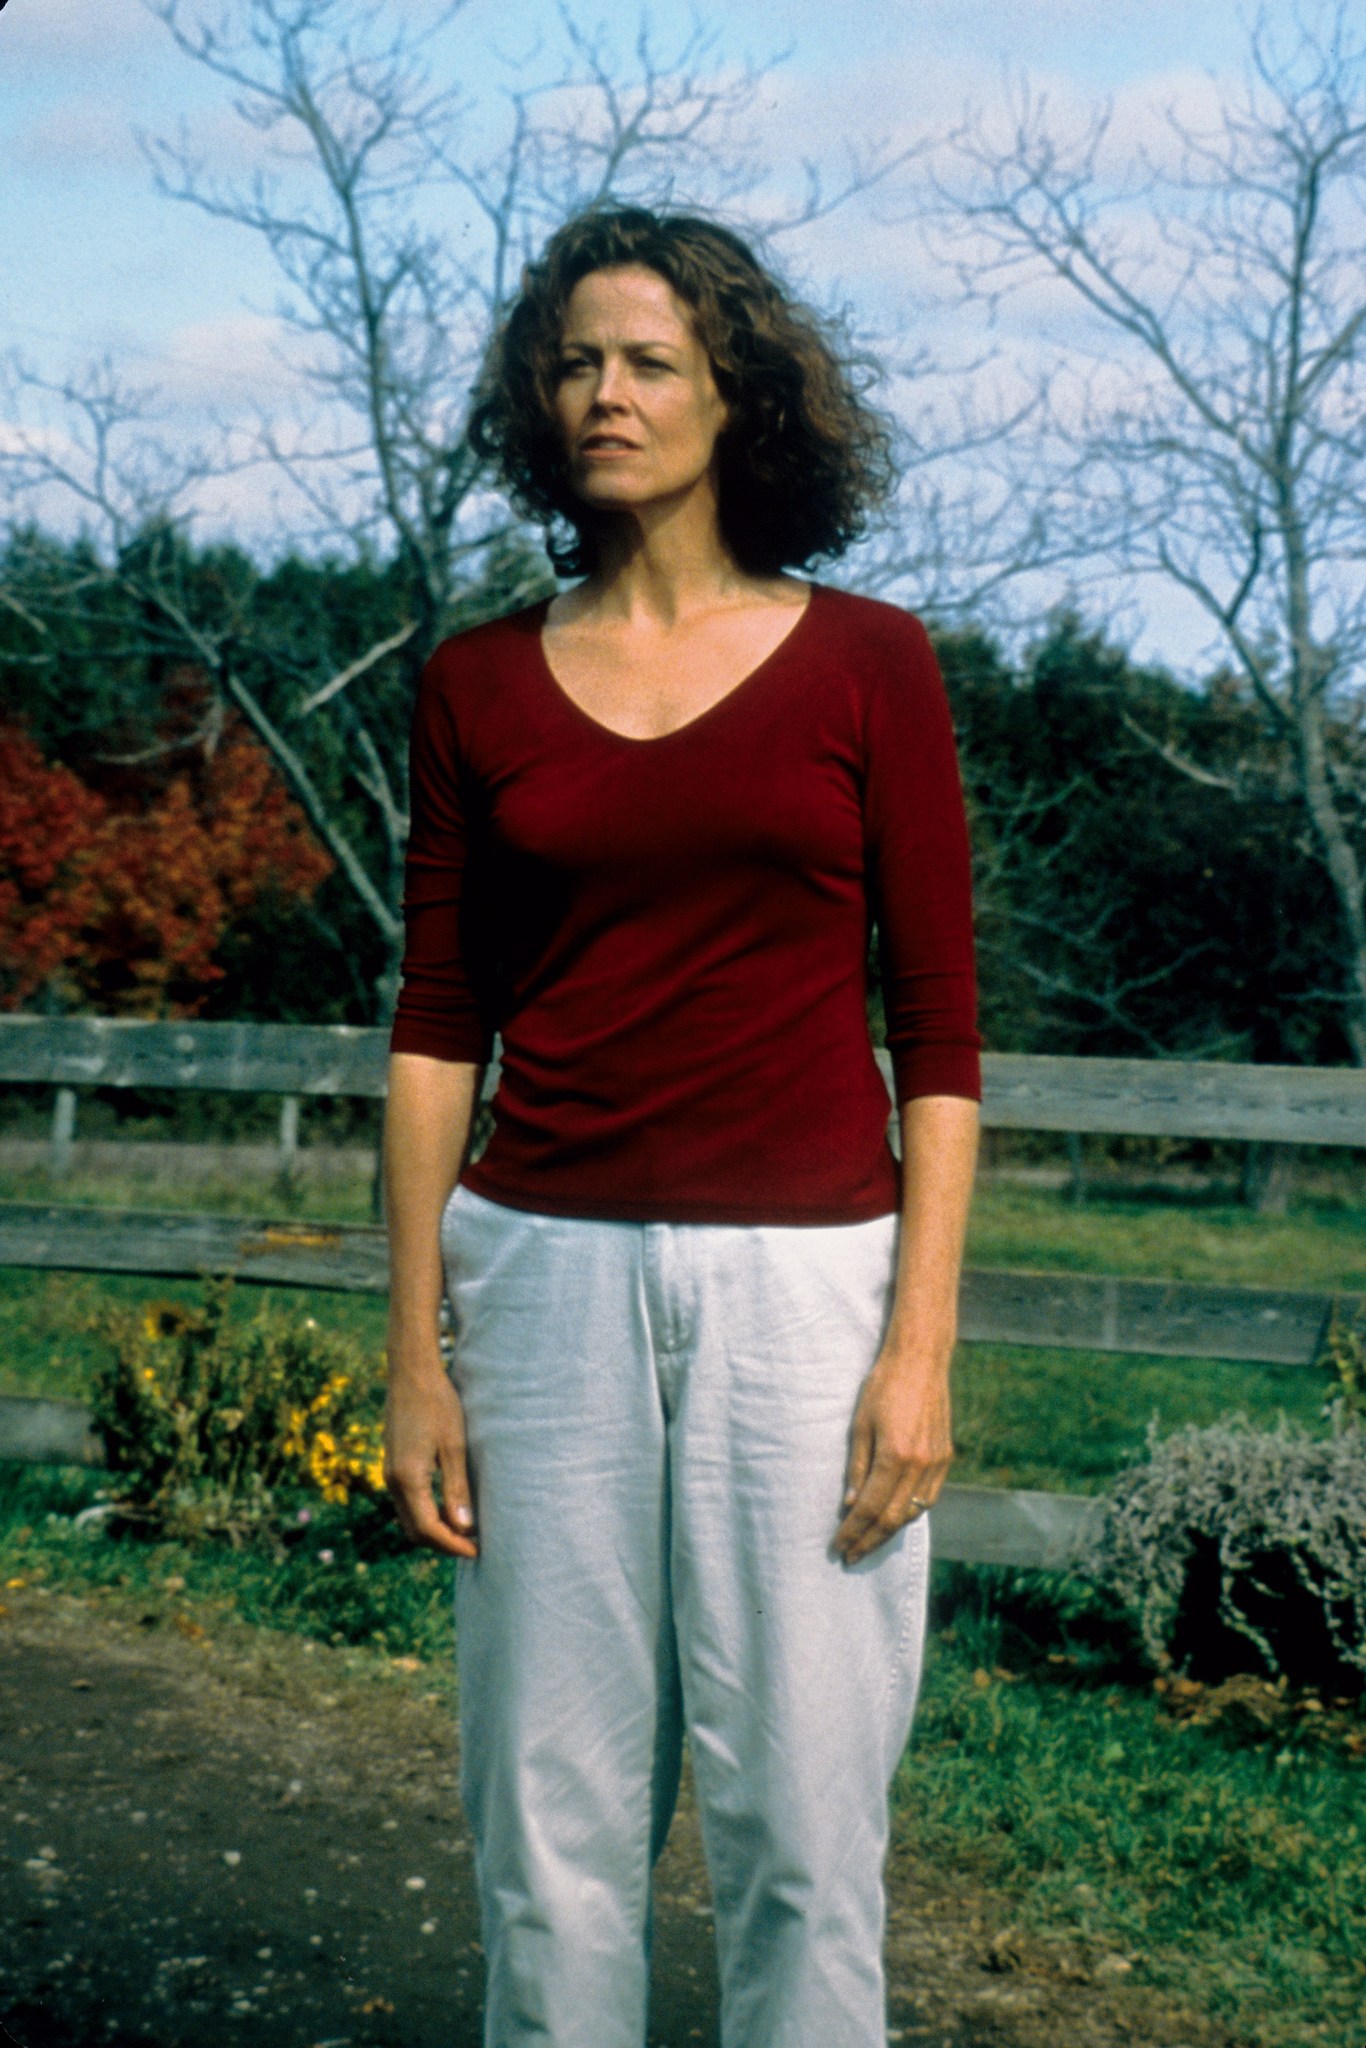 Sigourney Weaver in A Map of the World (1999)